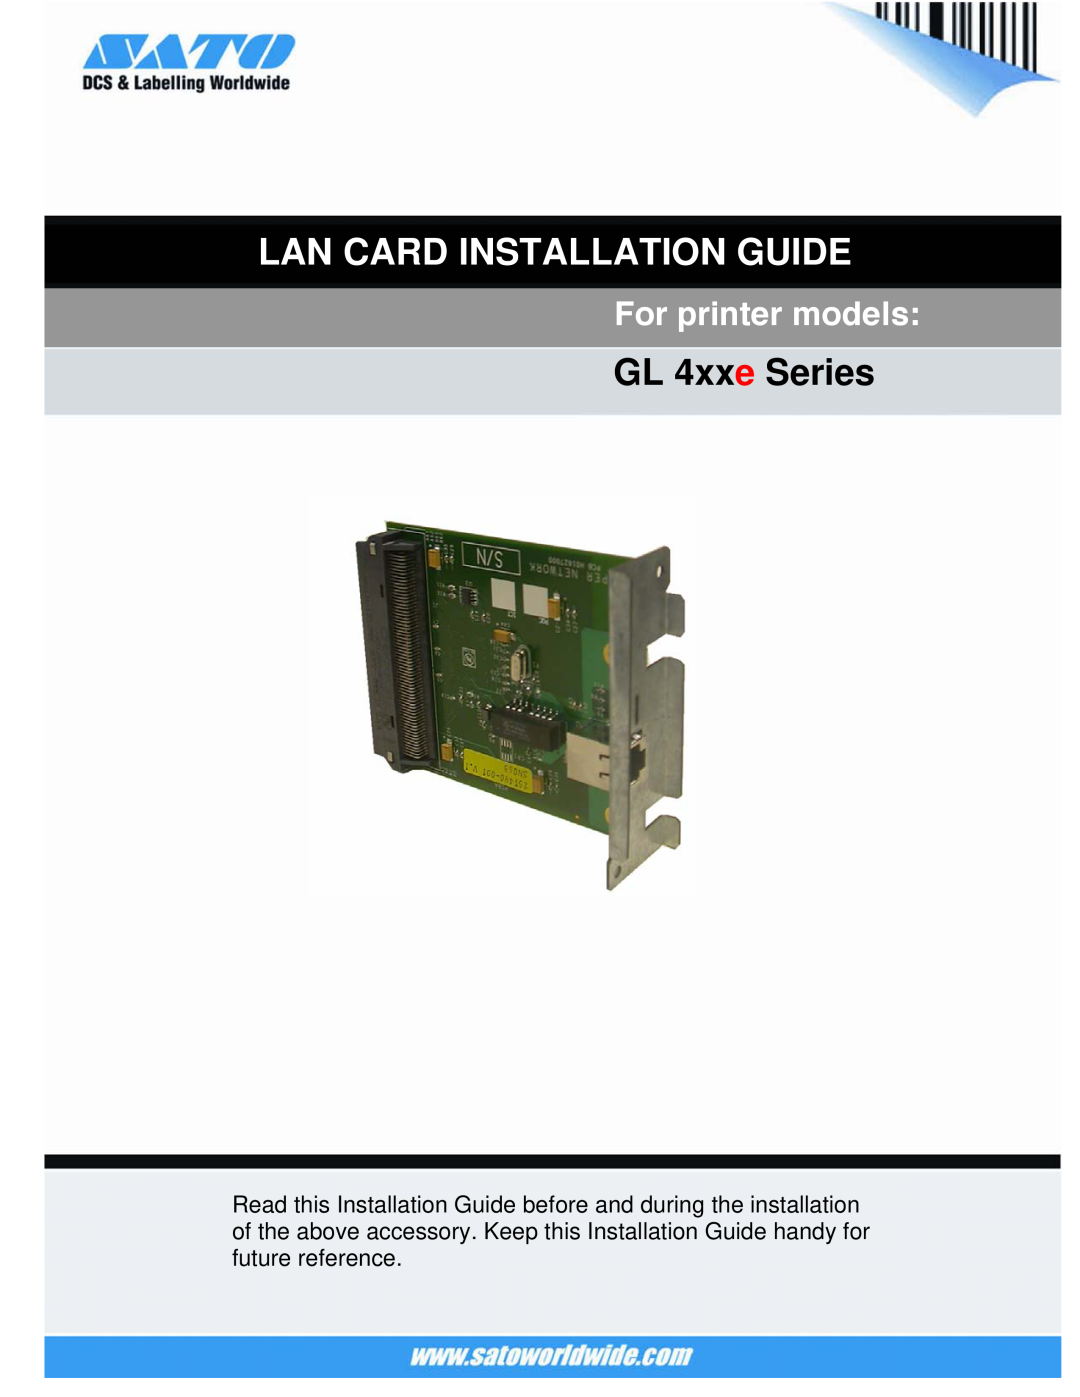 SATO GL 4xxe Series manual Important information, This quick guide provides important information on how to setup your 